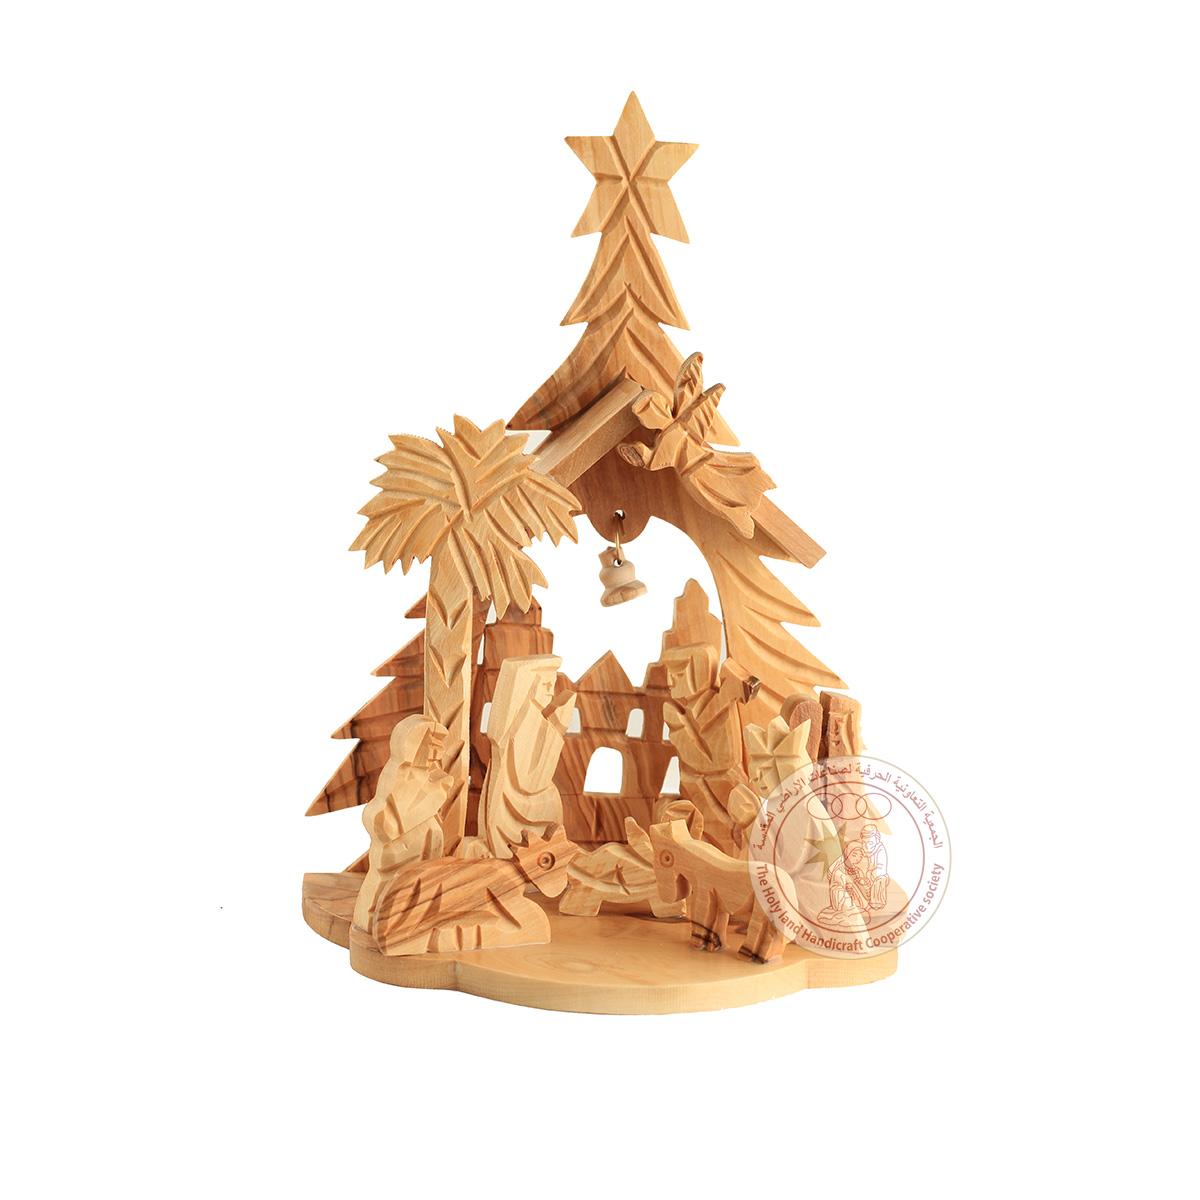 Nativity Creche - Olive Wood, Christmas Tree, Star and Bell